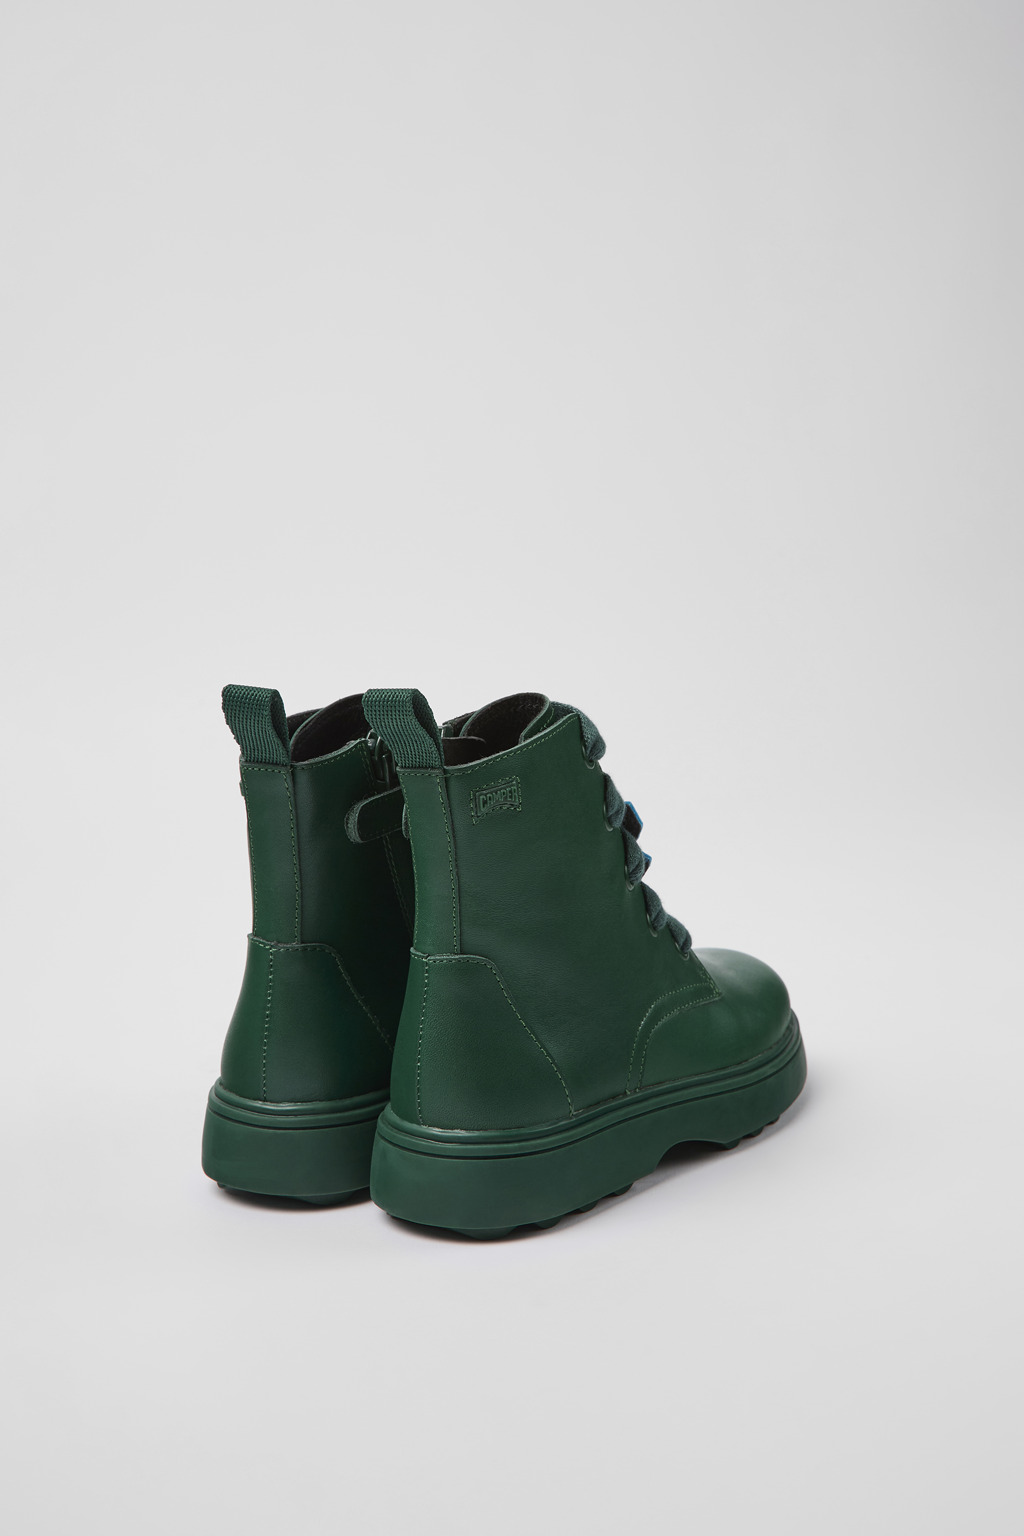 Twins Green Boots for Kids - Fall/Winter collection - Camper United